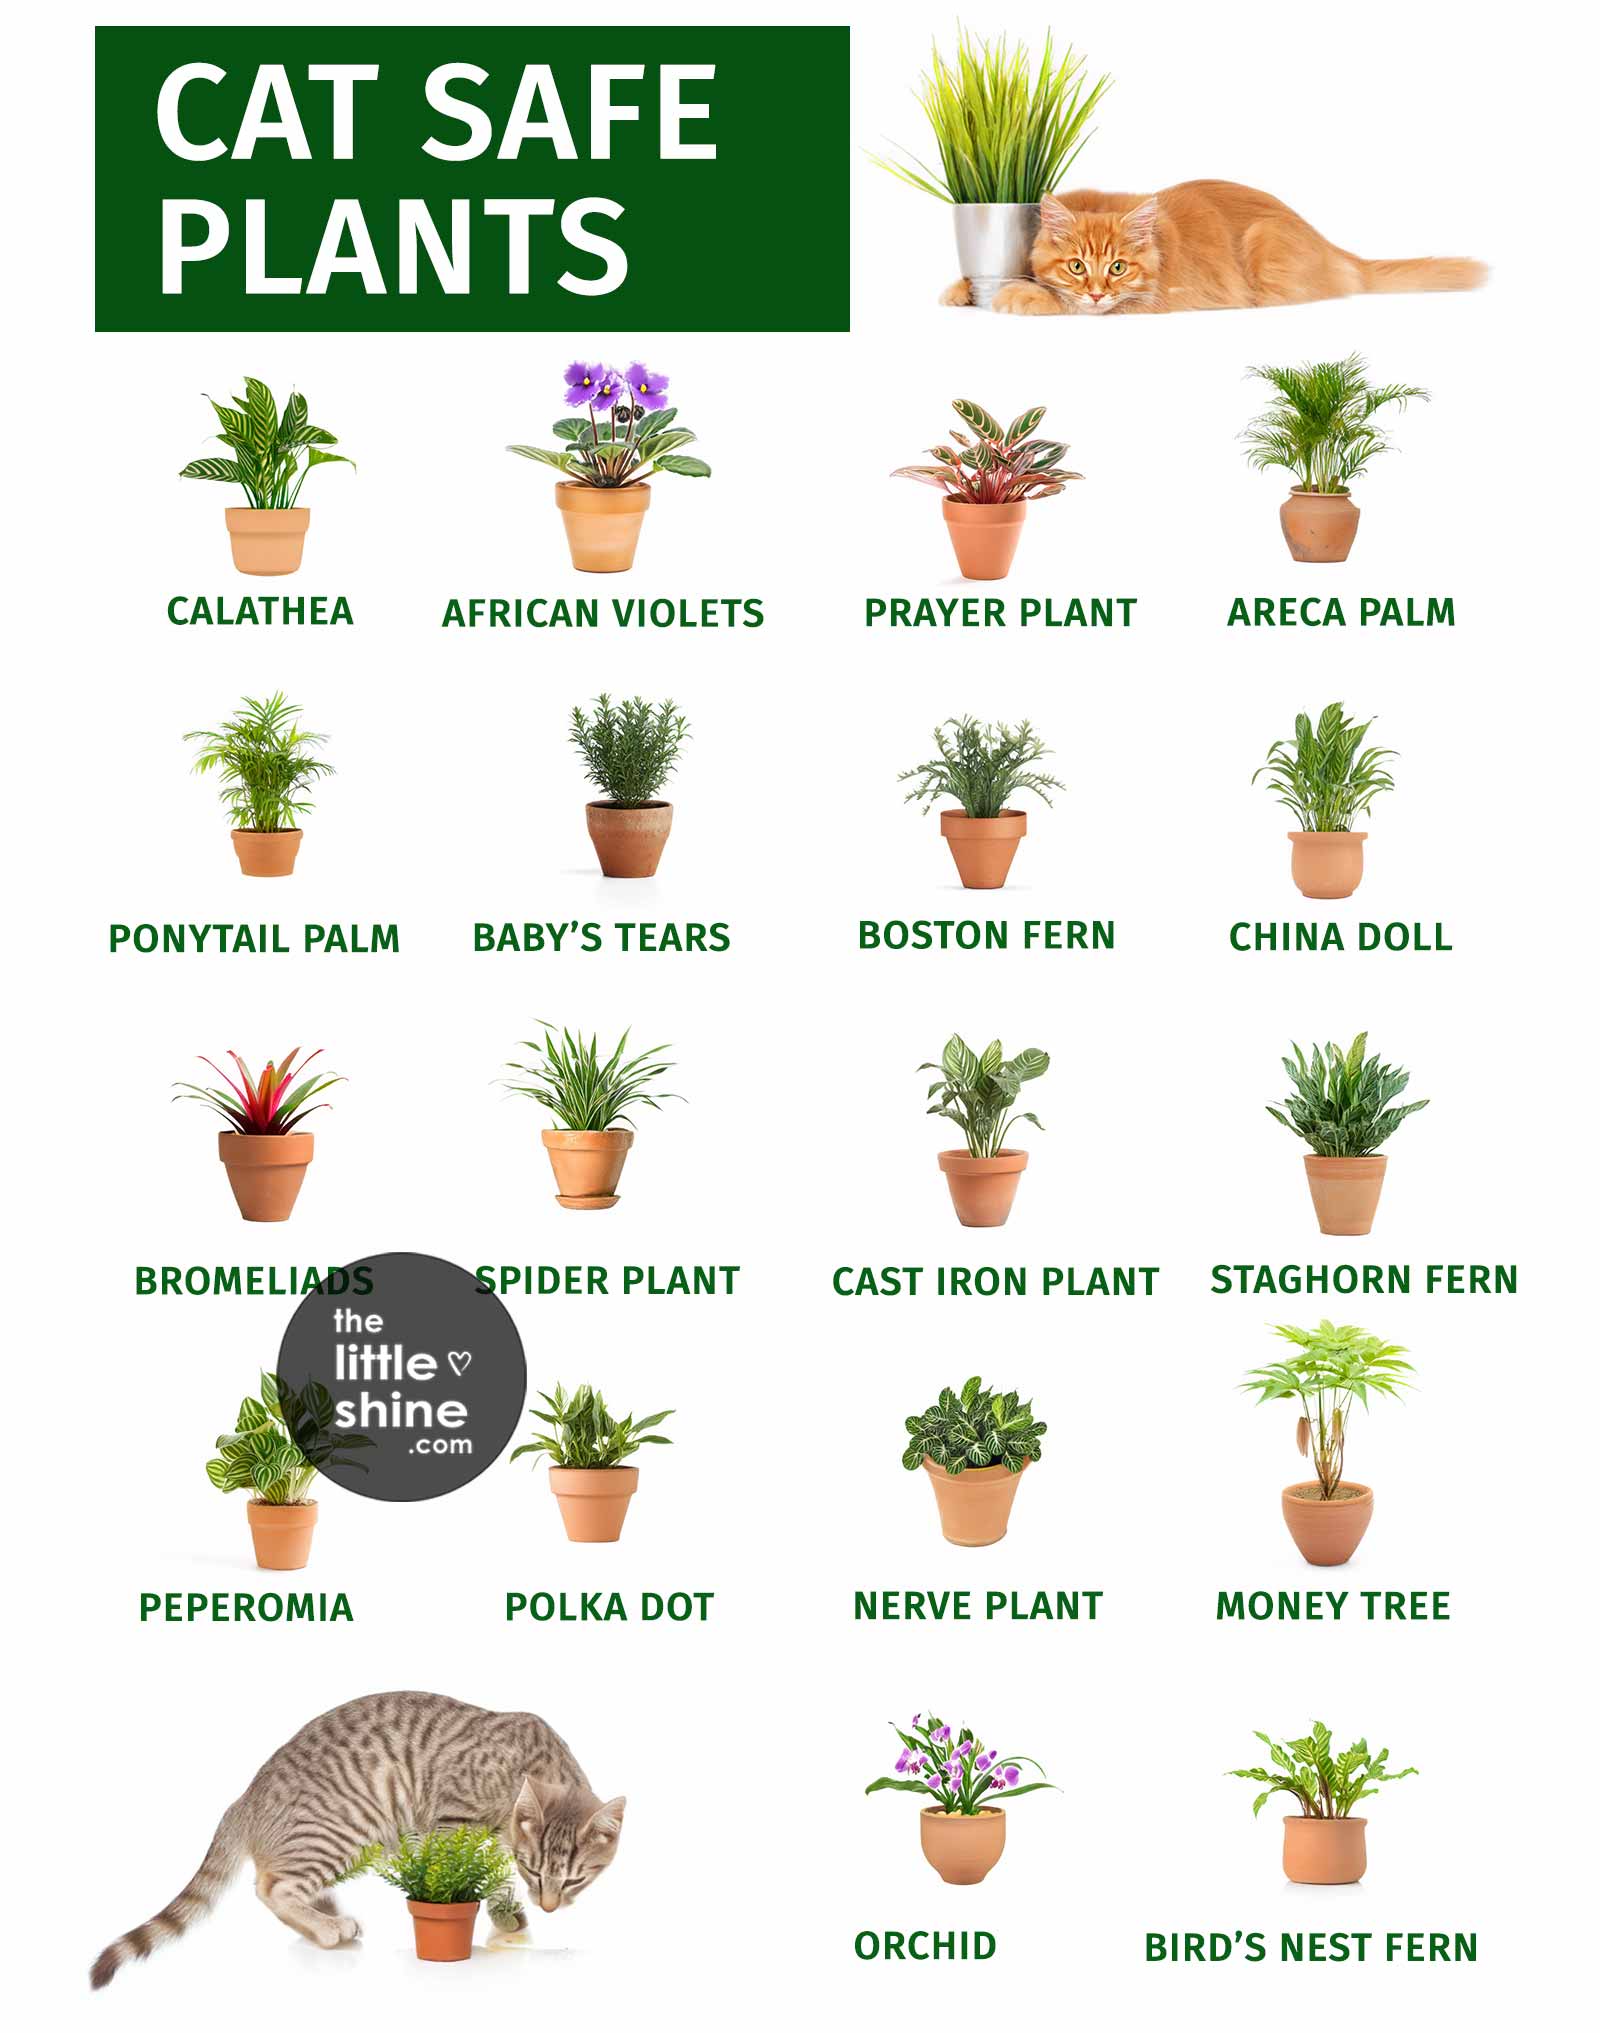 16 Low Light Plants that are Safe for Cats